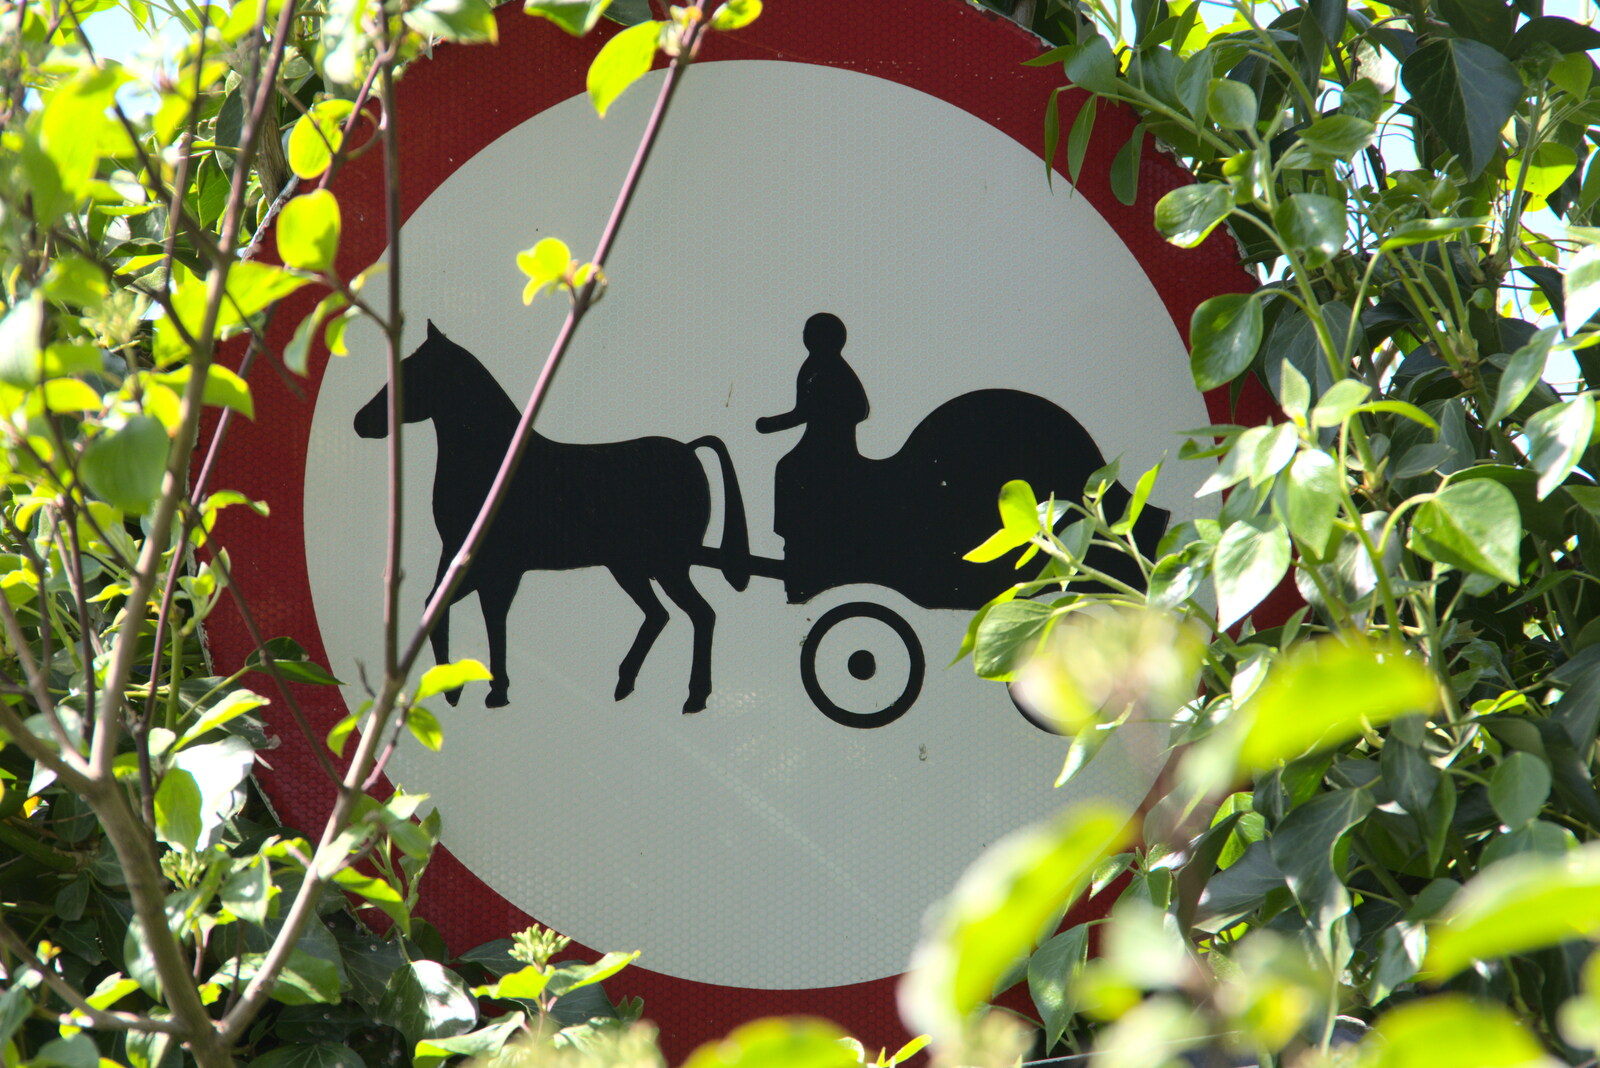 The 'no horse and buggy' sign is almost overgrown from A Walk up Rapsy Tapsy Lane, Eye, Suffolk - 9th May 2020